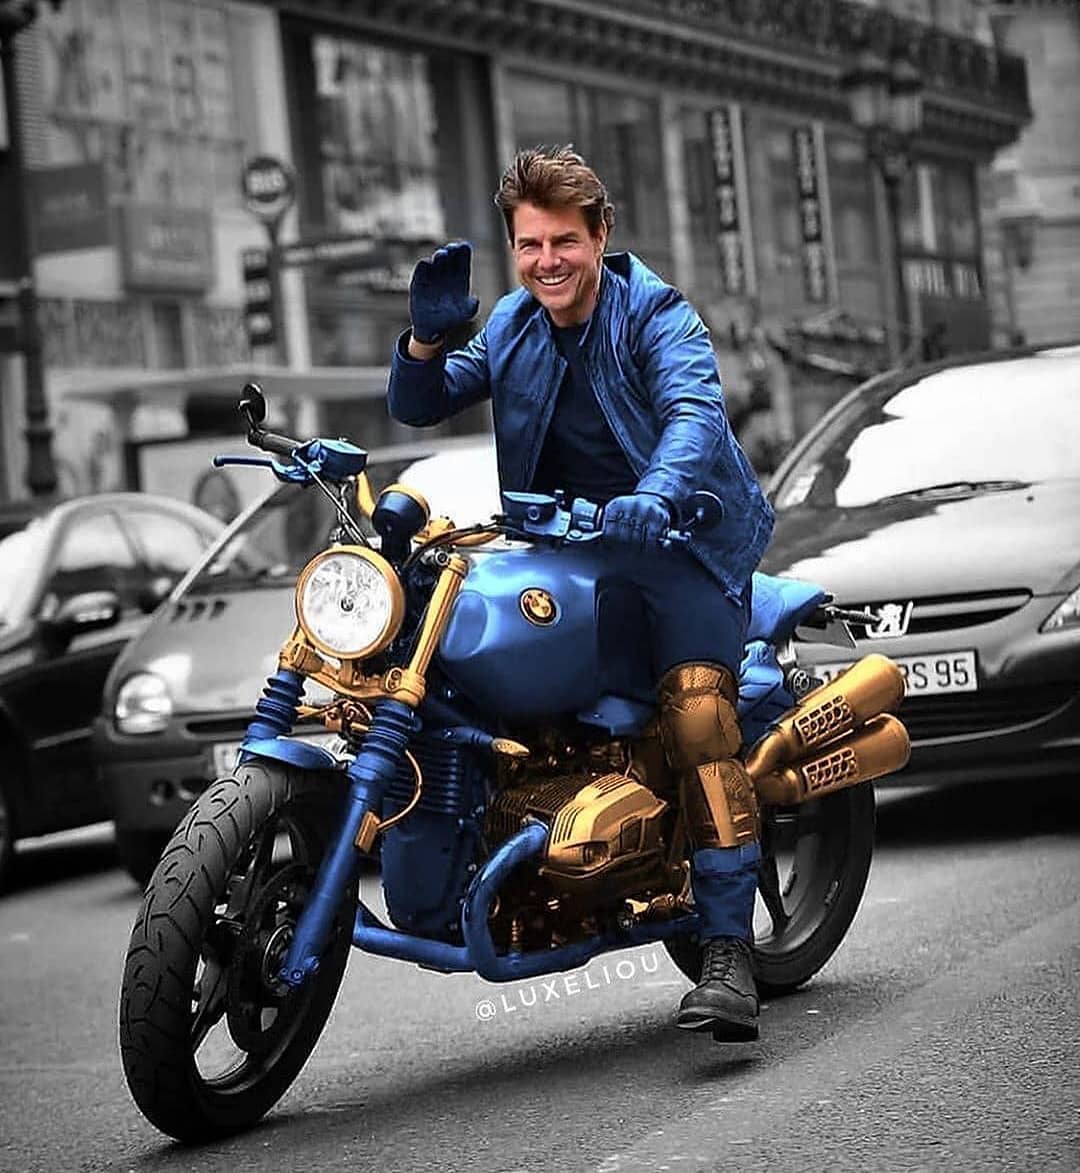 Tom Cruise doing Tom Cruise 🙌🏽 double tap if you like this shot 🔥
-
Follow 👉 @pinstripemag for more!🍾
.
.
.
.
.
#superbike #superbikes #britishsuperbikes #worldsuperbike #superbikesofinstagram #sportsbikelife #sportsbike #sportsbikes #sportsbikelife #sportsbike #sportbike